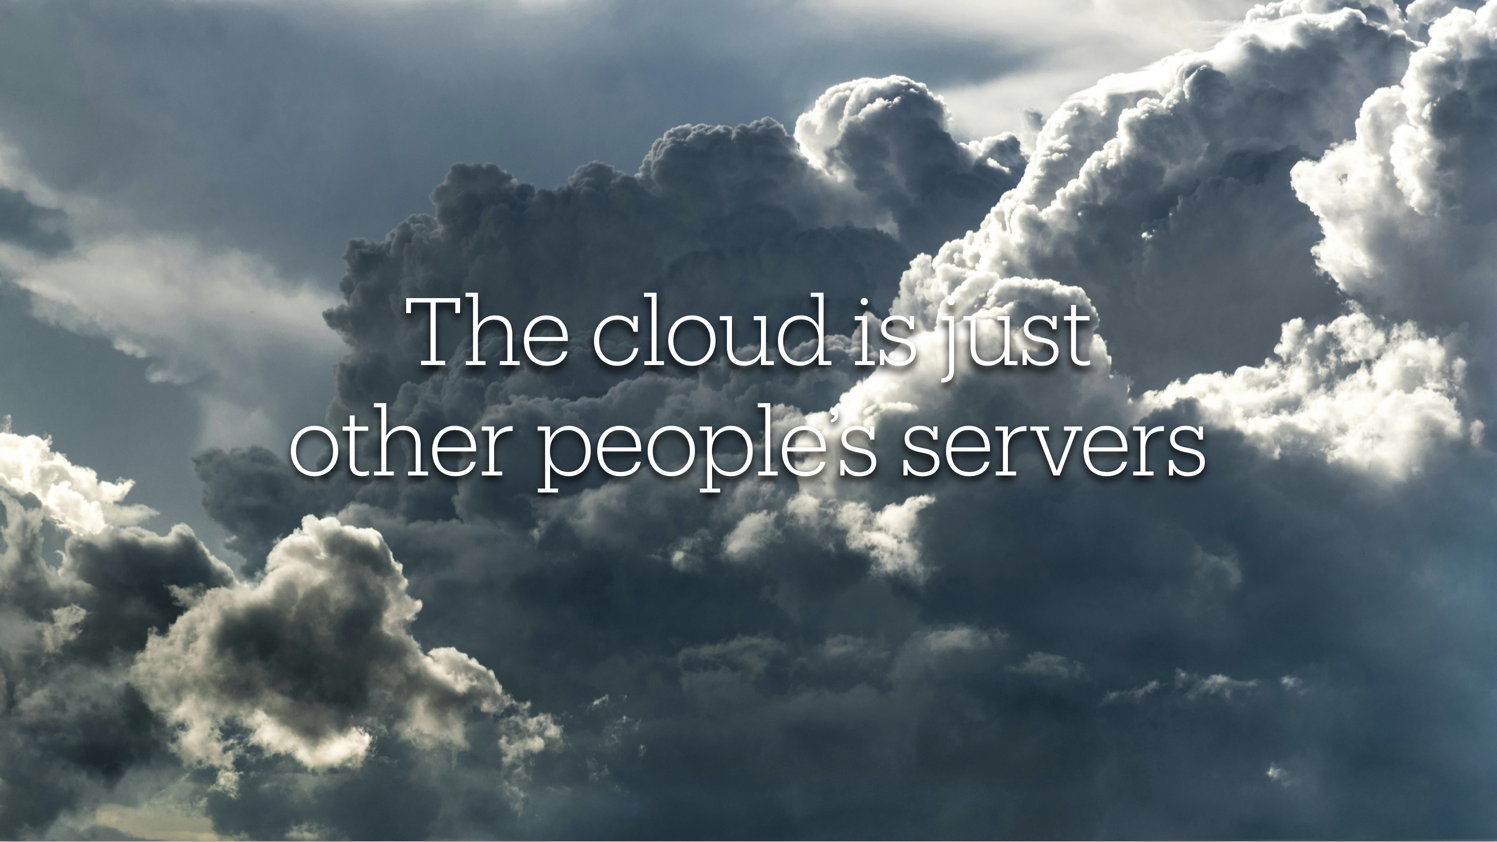 The cloud is just other people’s servers